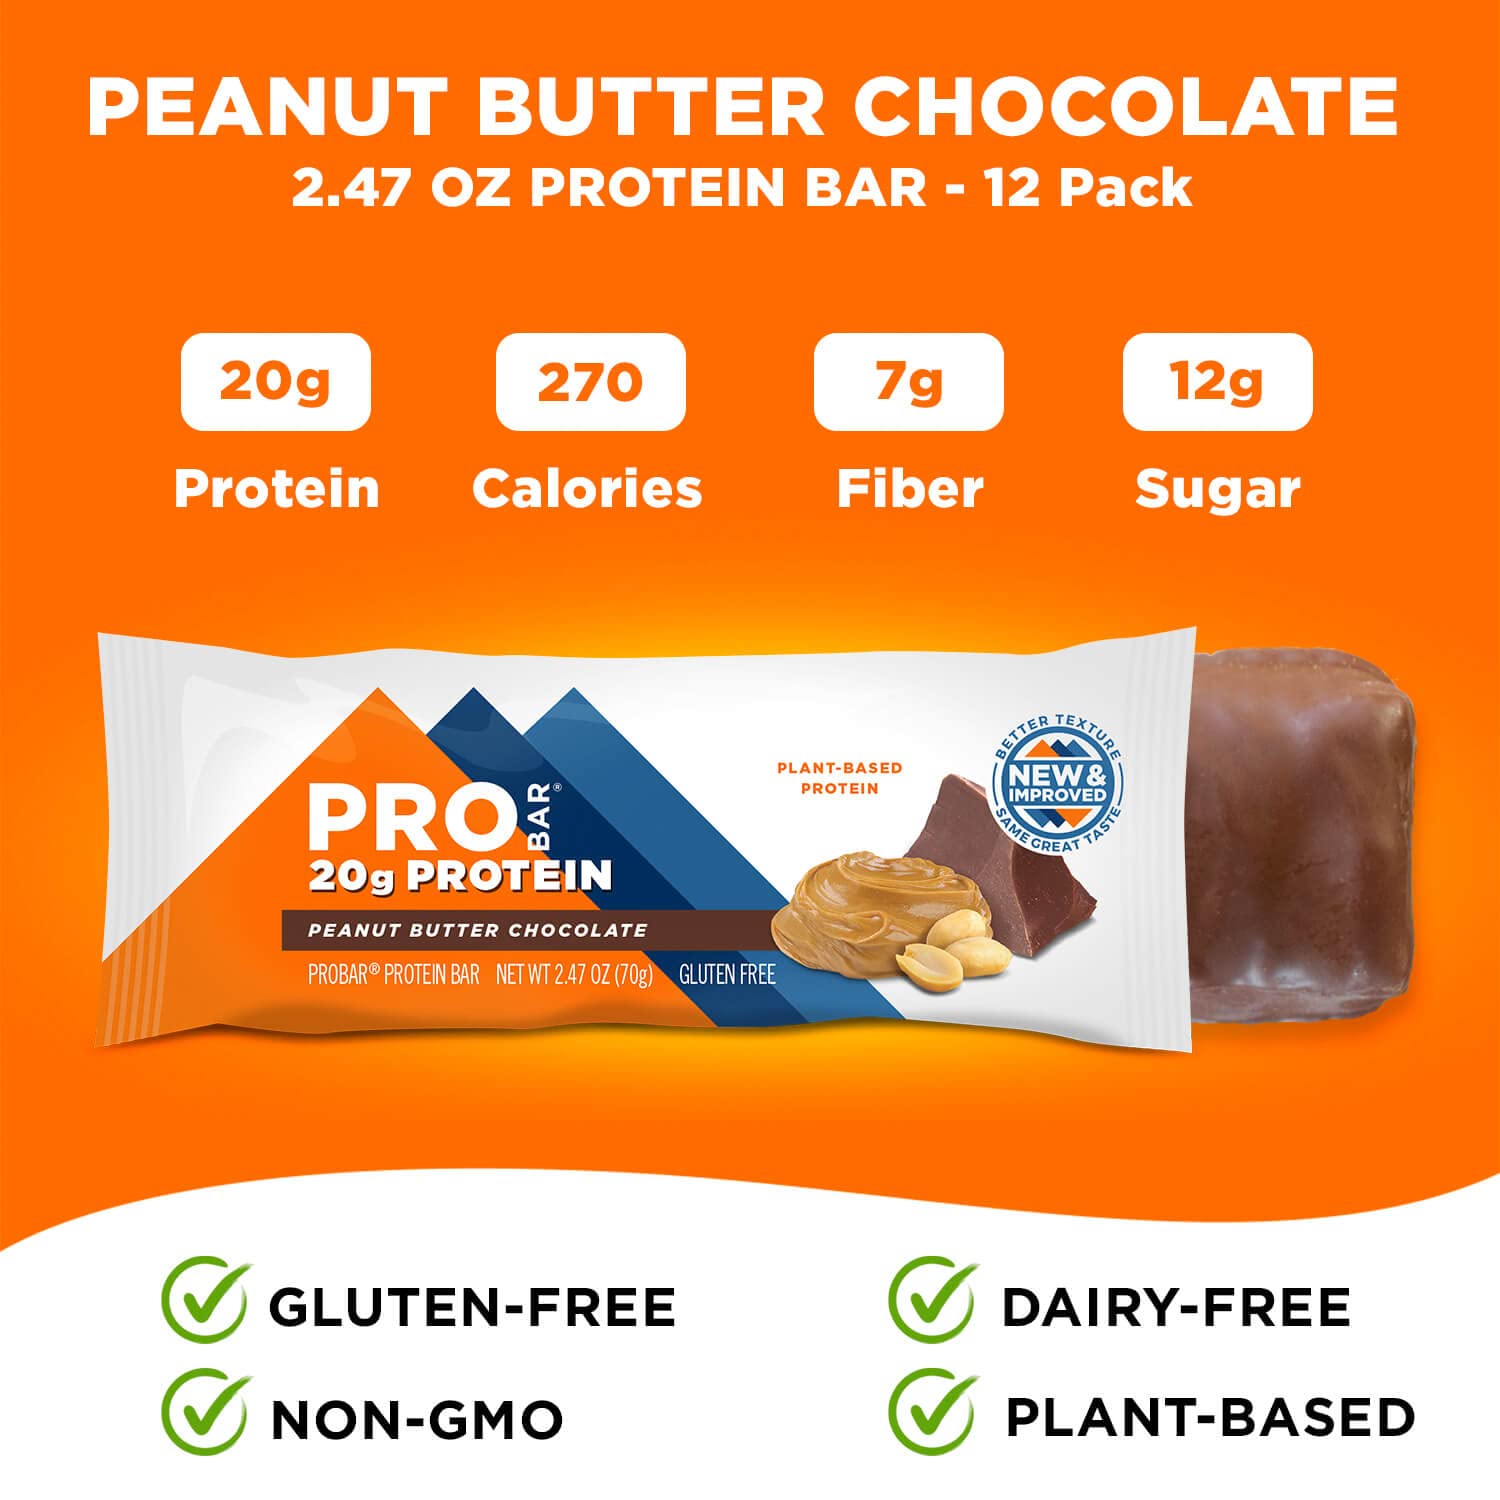 PROBAR - PROTEIN Bar, Peanut Butter Chocolate, Non-GMO, Gluten-Free, Healthy, Plant-Based Whole Food Ingredients, Natural Energy (12 Count)